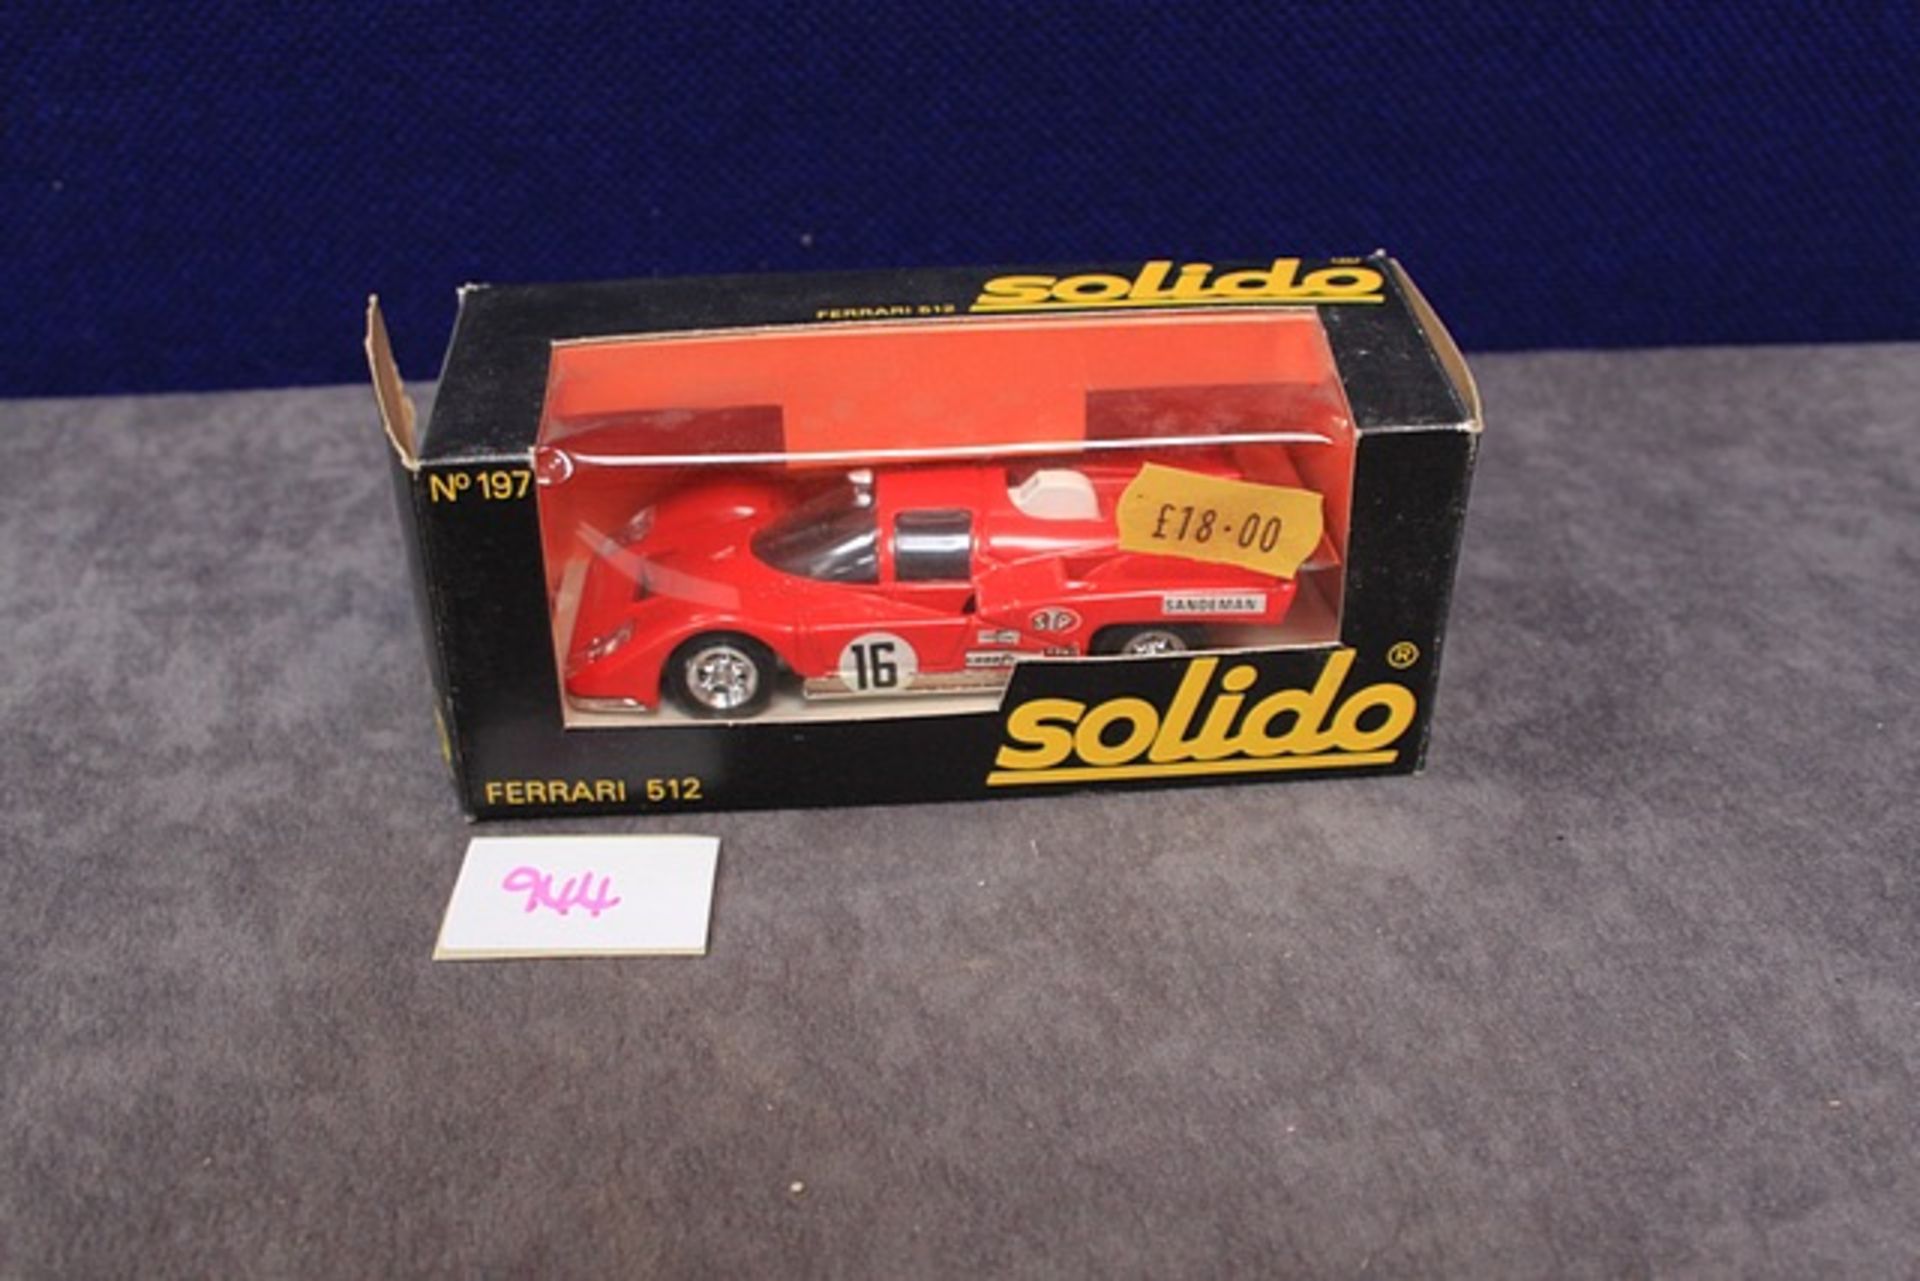 Solido Diecast Models # 197 Ferrari 512 With Racing # 16 In Box (Tab Missing)